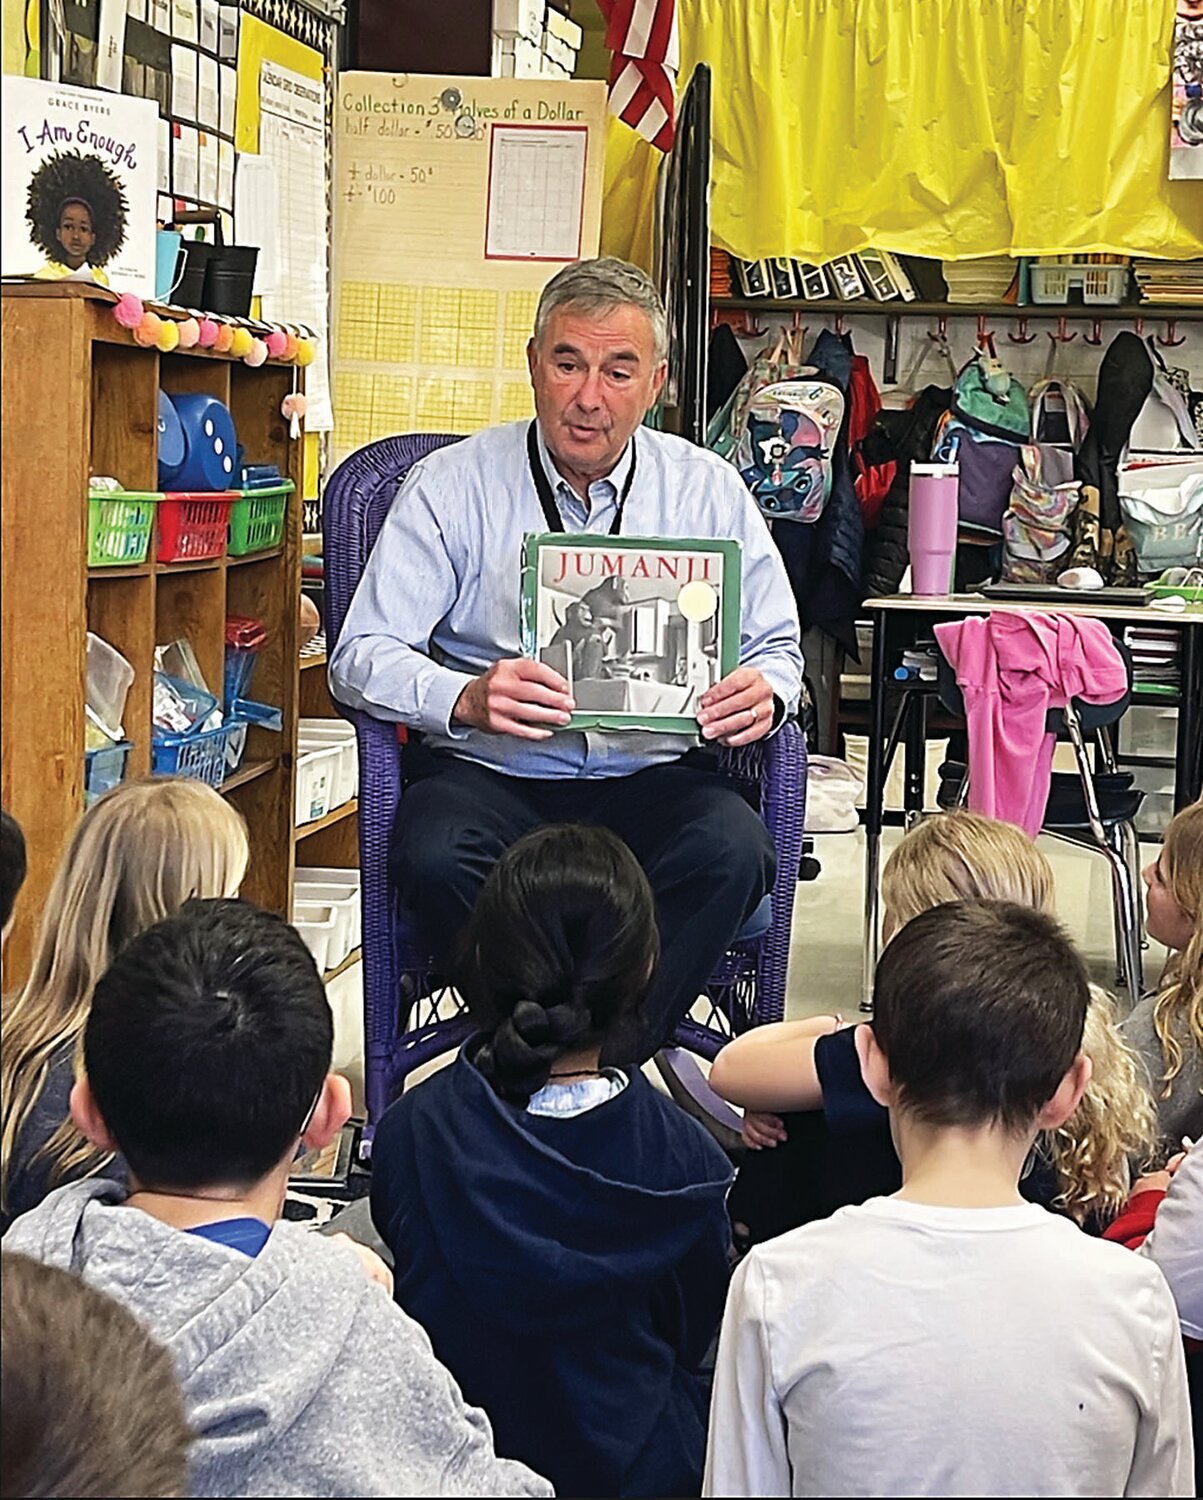 Former Council Rock Superintendent Mark Klein, who spent 37 years in the district before retiring in 2015, came back to Newtown Elementary School last week to read to Mindy Popescu’s third grade class.